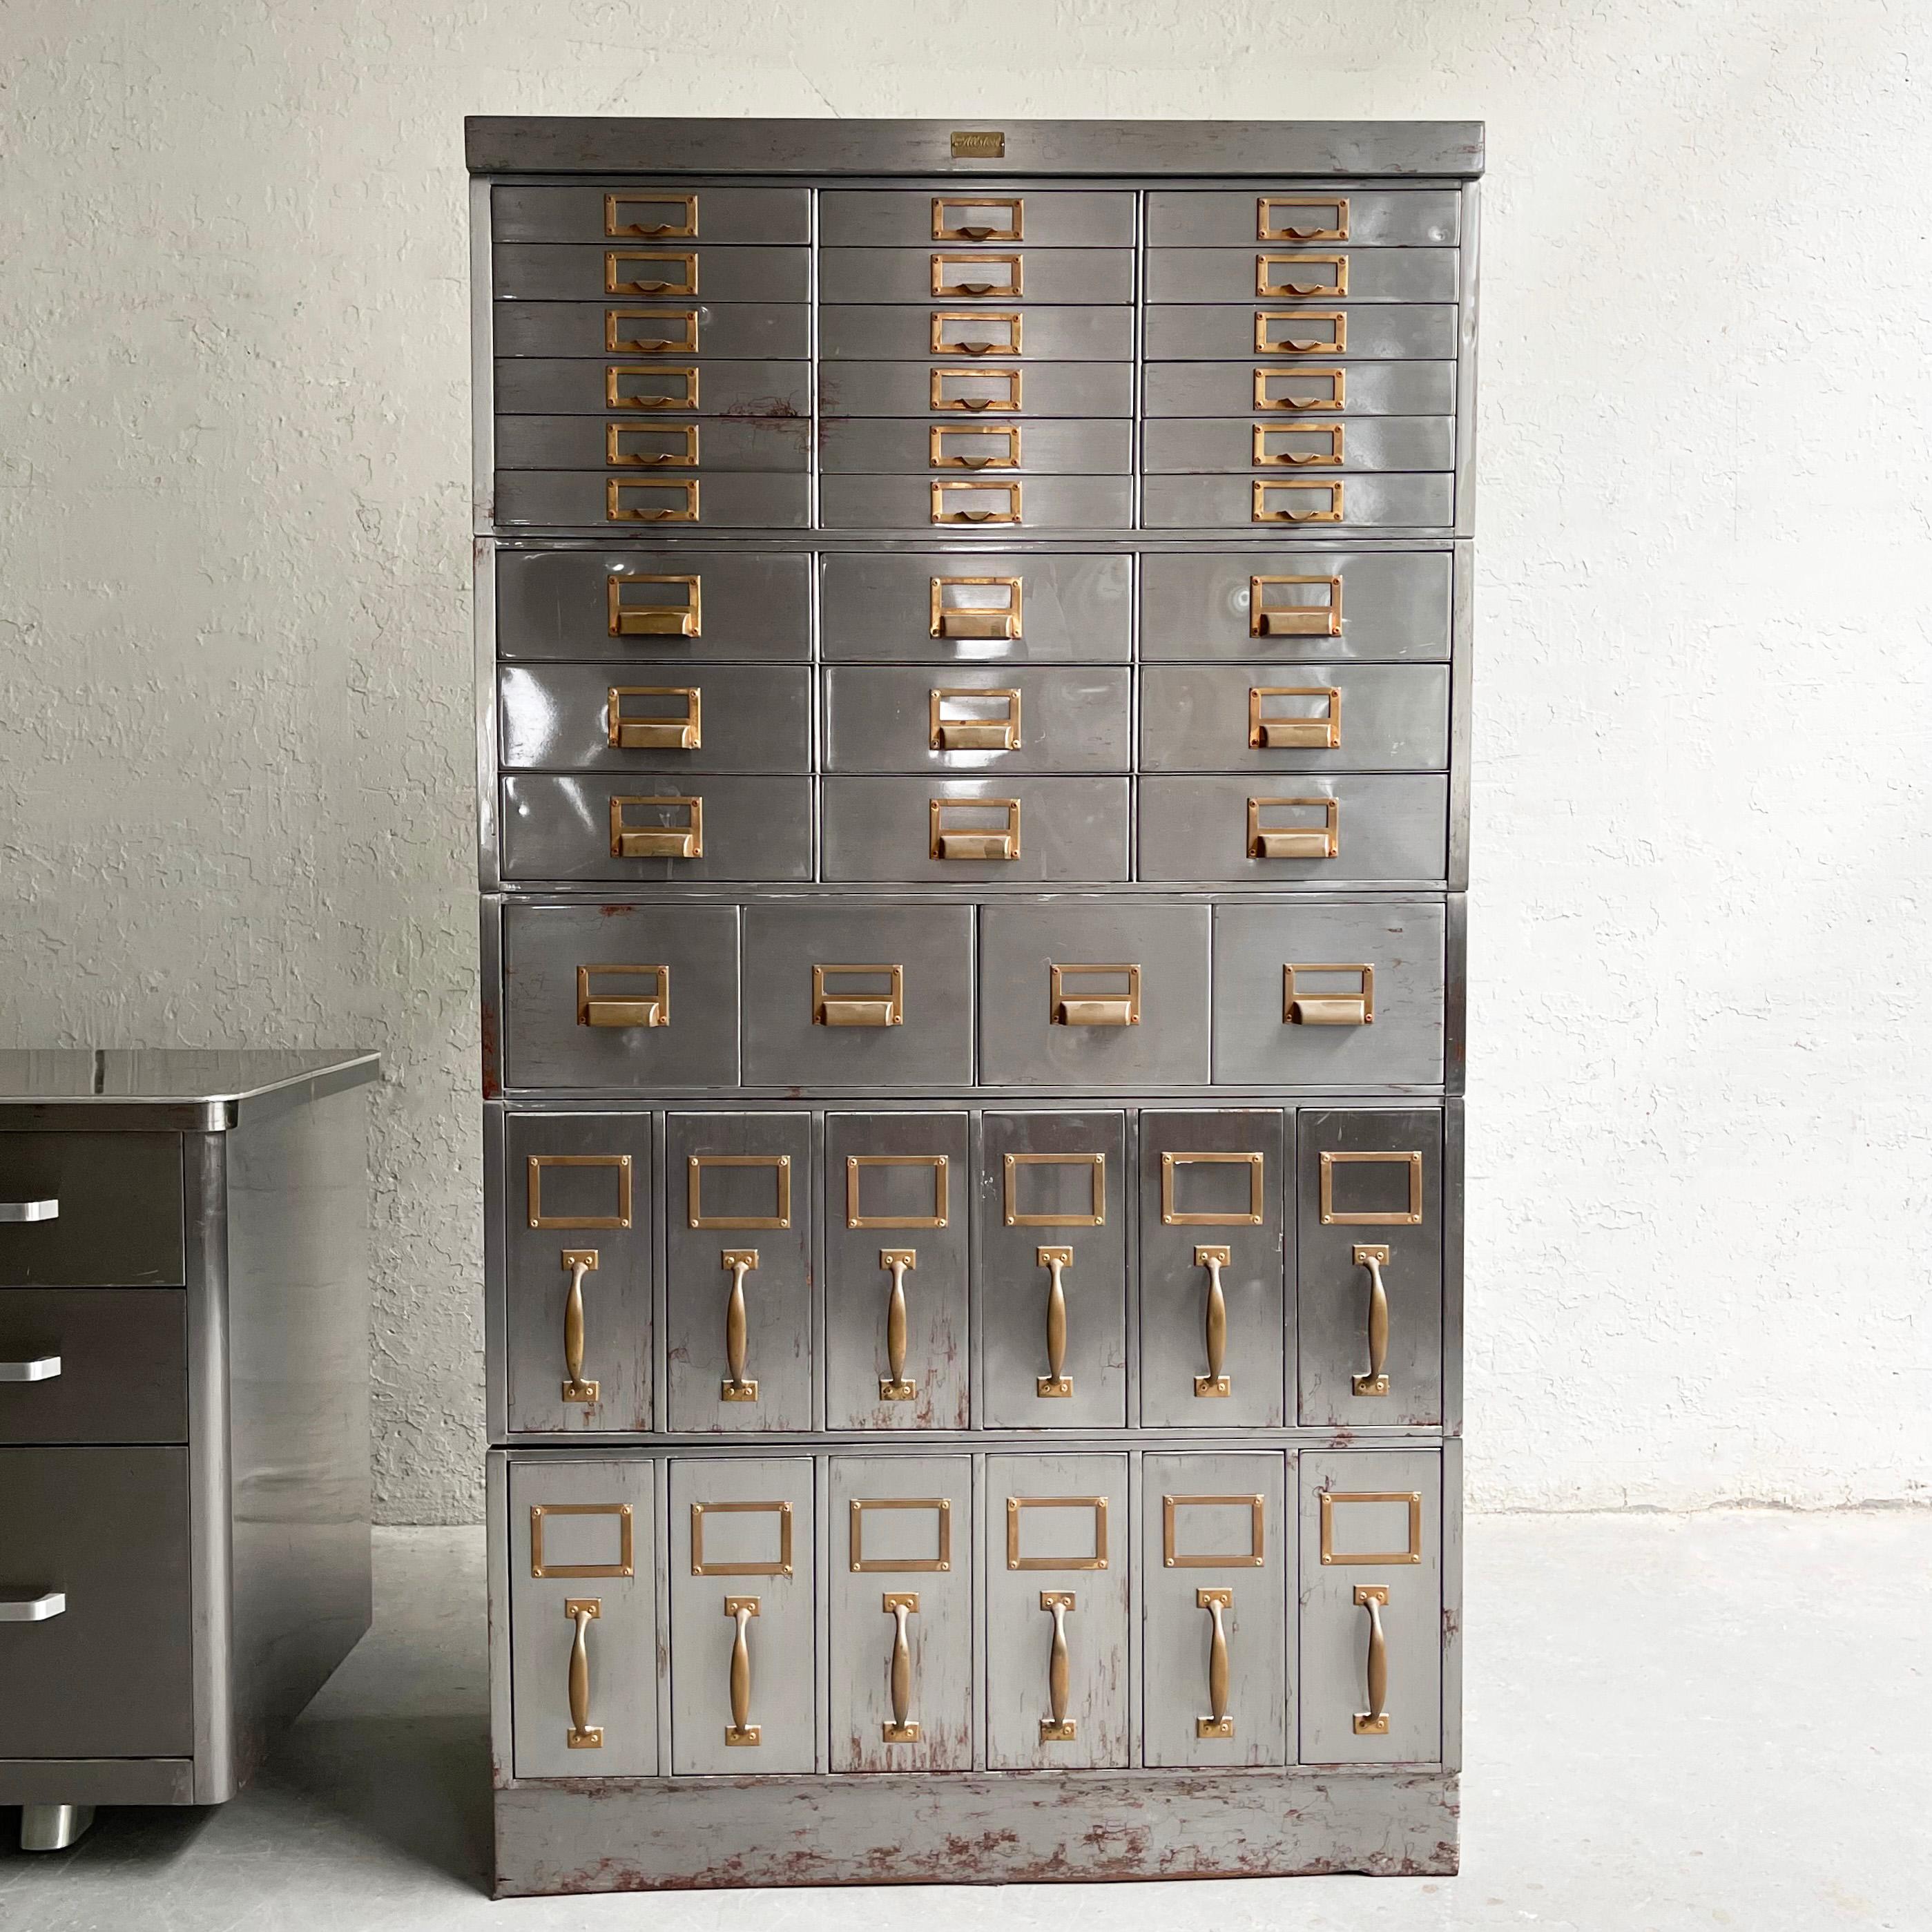 Midcentury, industrial, brushed steel, modular filing cabinet by Allsteel features multiple various sized drawers measuring from top: 10 x 1.75, 10 x 3.5, 8 x 6.25, 5 x 11 inches. The cabinet consists of 7 interlocking modular pieces.